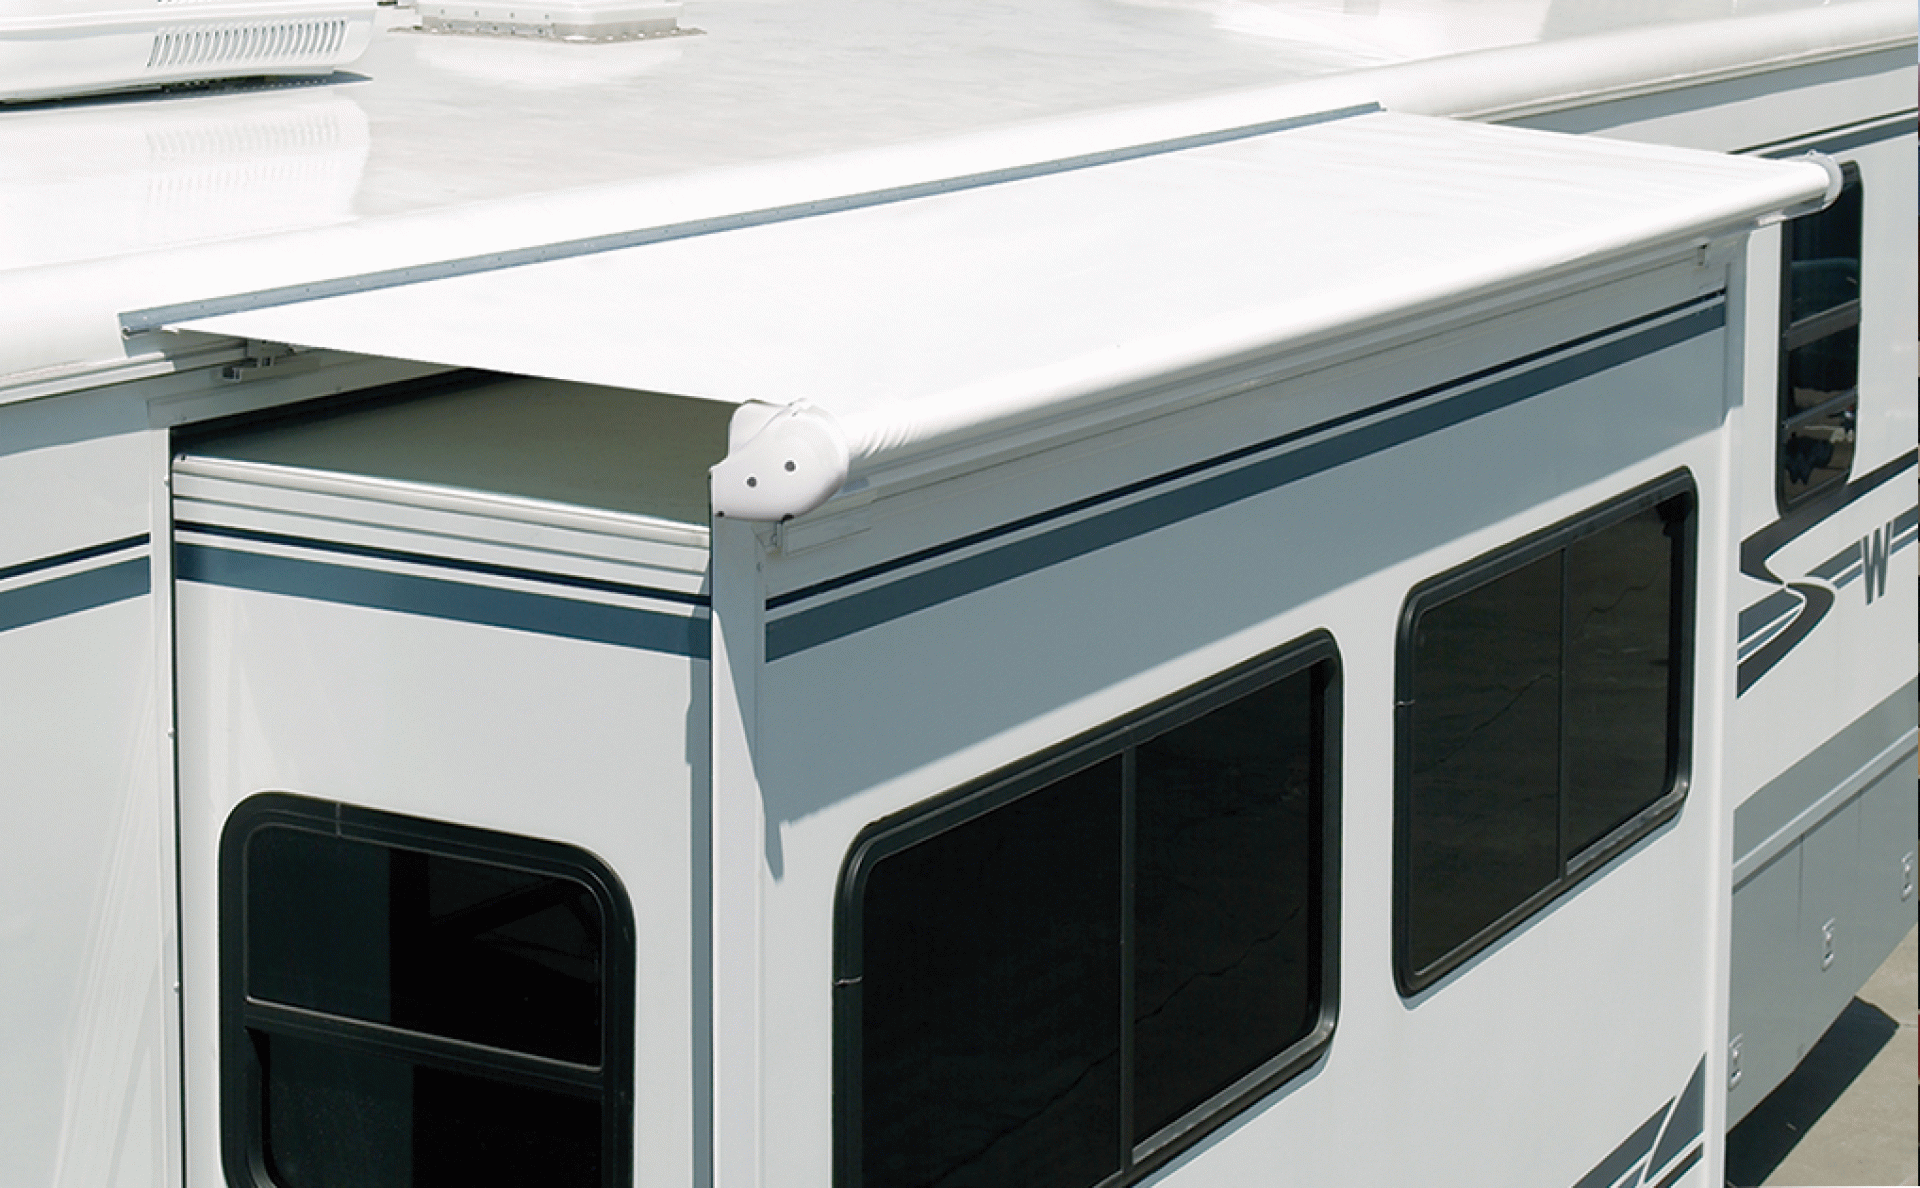 CAREFREE OF COLORADO | UQ1250025 | SIDEOUT KOVER III AWNING 118" - 125" ROOF RANGE WHITE VINYL FABRIC & DEFLECTOR